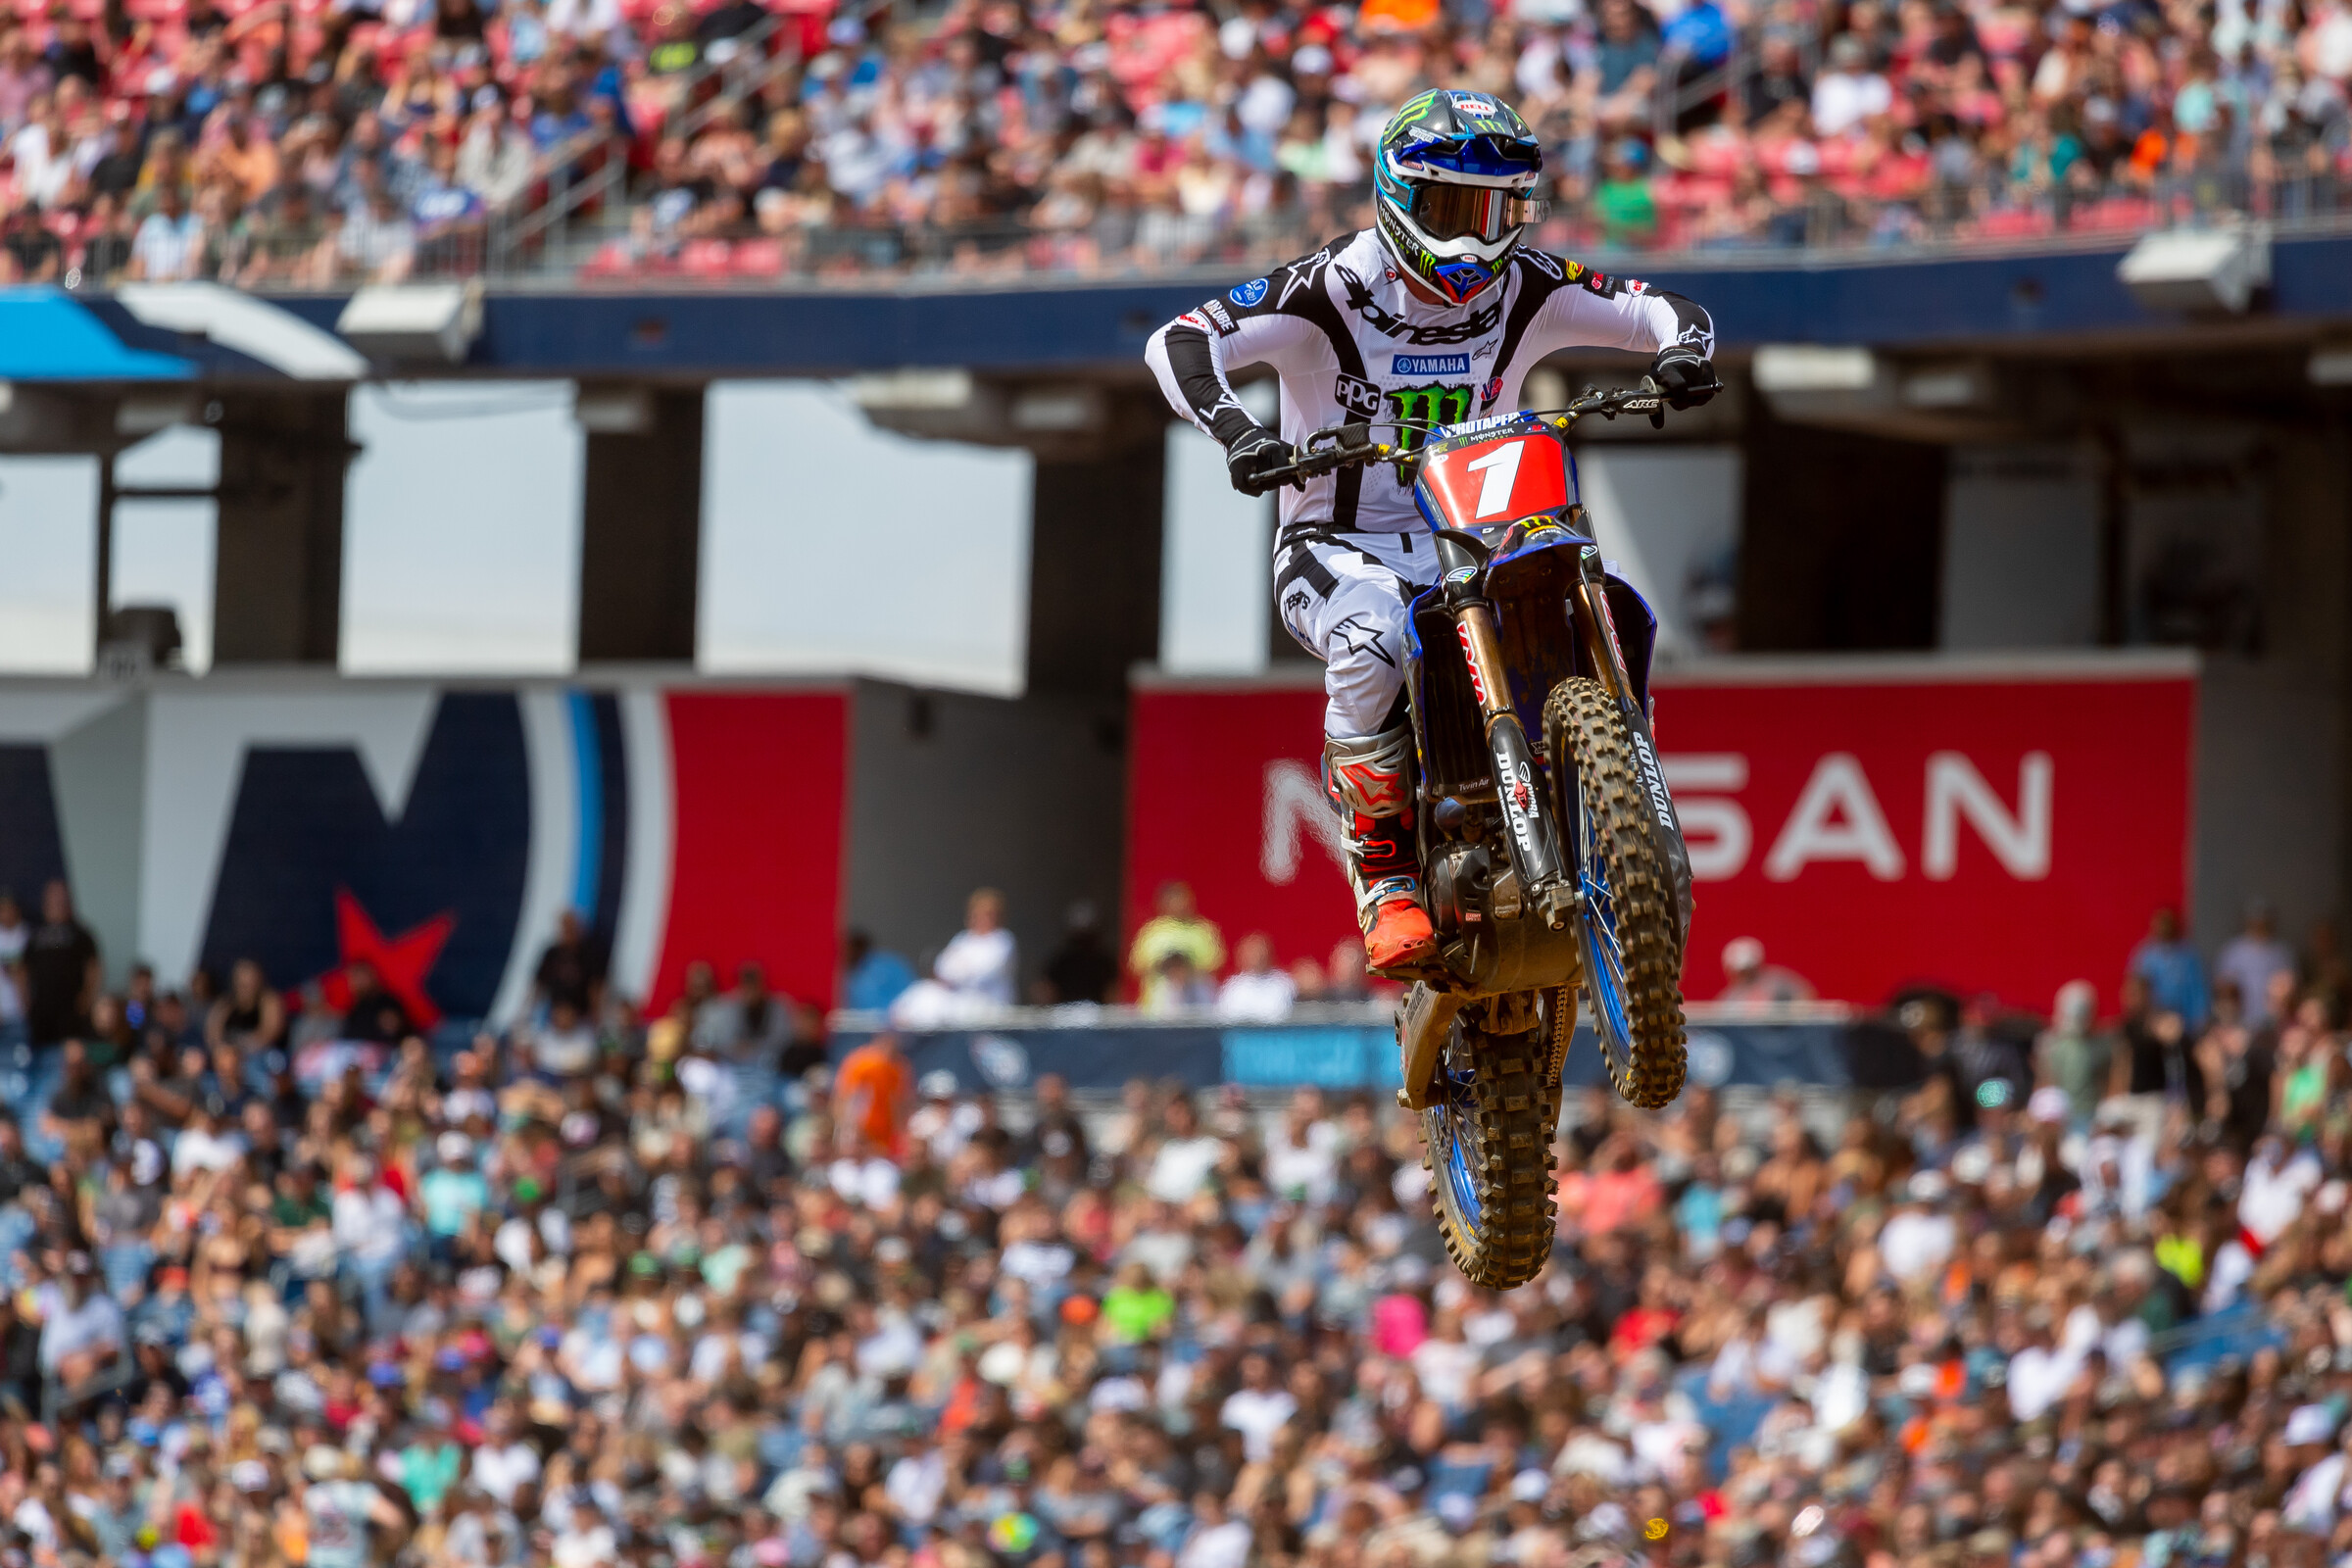 Supercross—Sports in General—Prove Never Take Anything for Granted